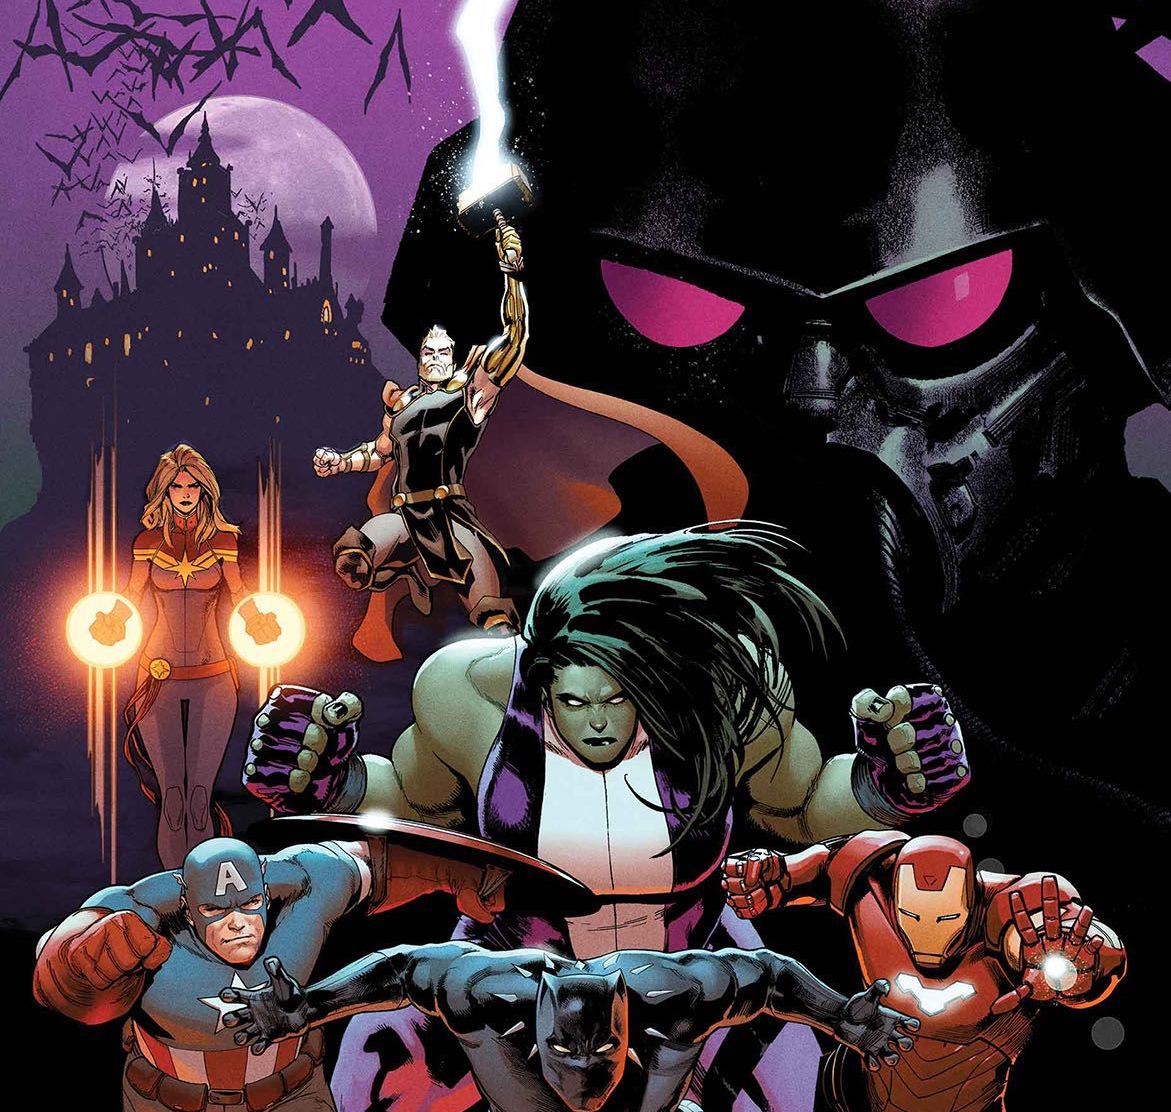 Avengers by Jason Aaron Vol. 3: War of the Vampires Review